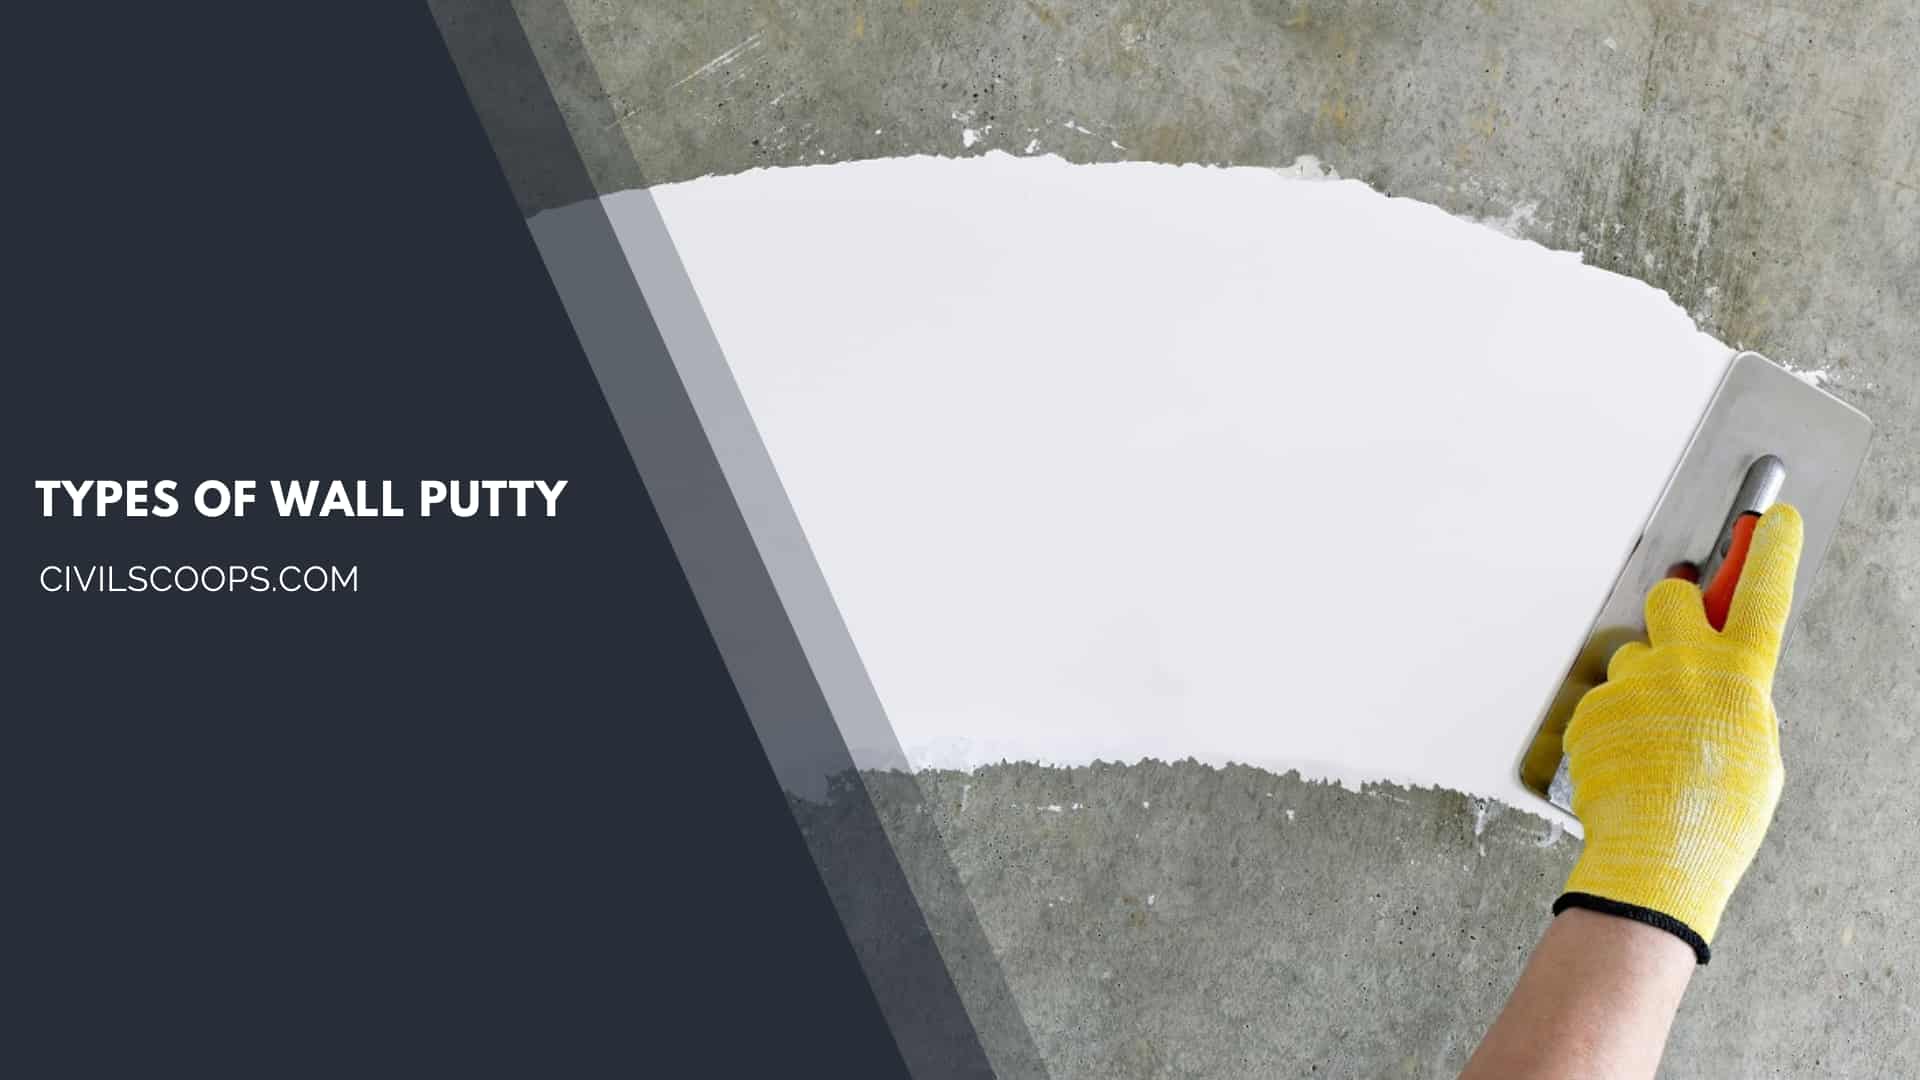 Types of Wall Putty